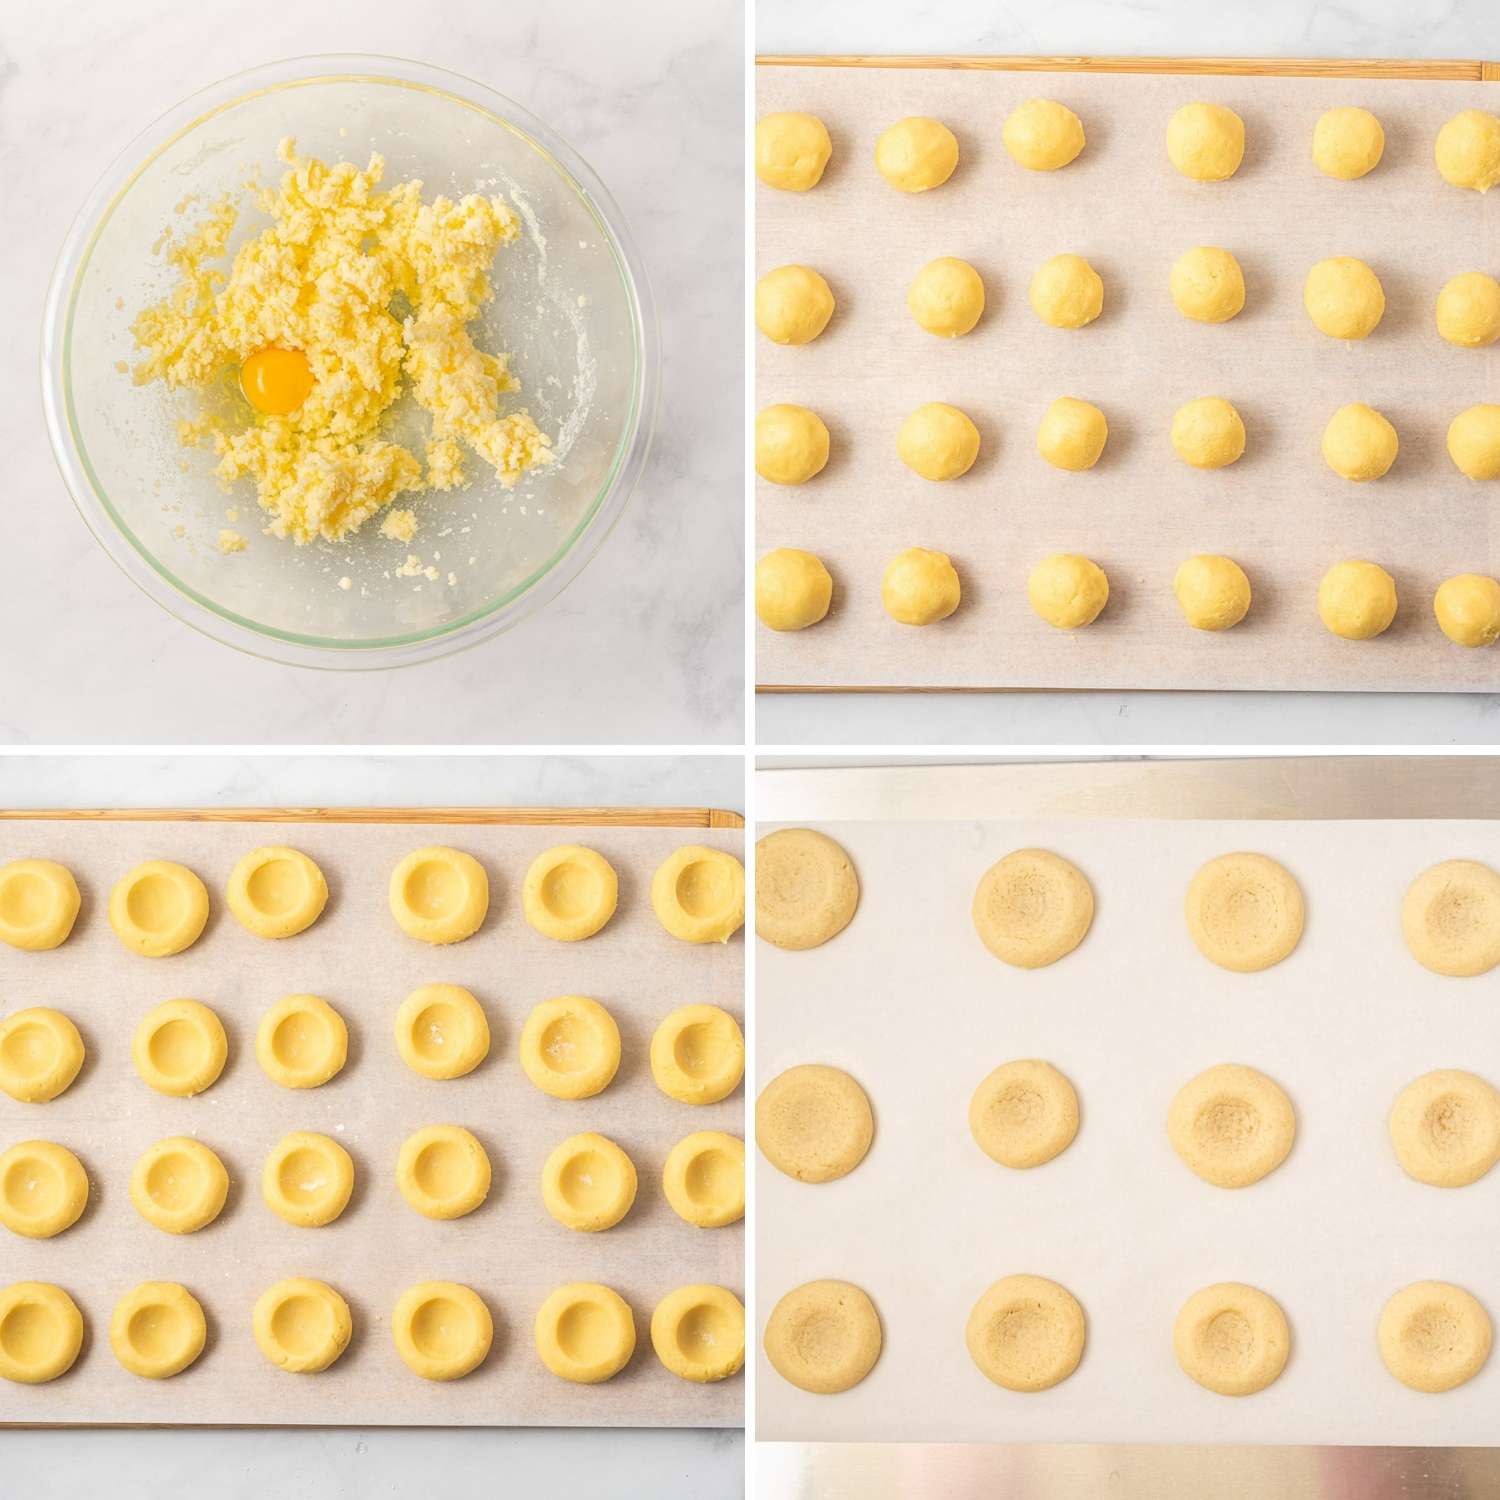 Collage of four images showing how to make thumbprint cookie dough and shape it